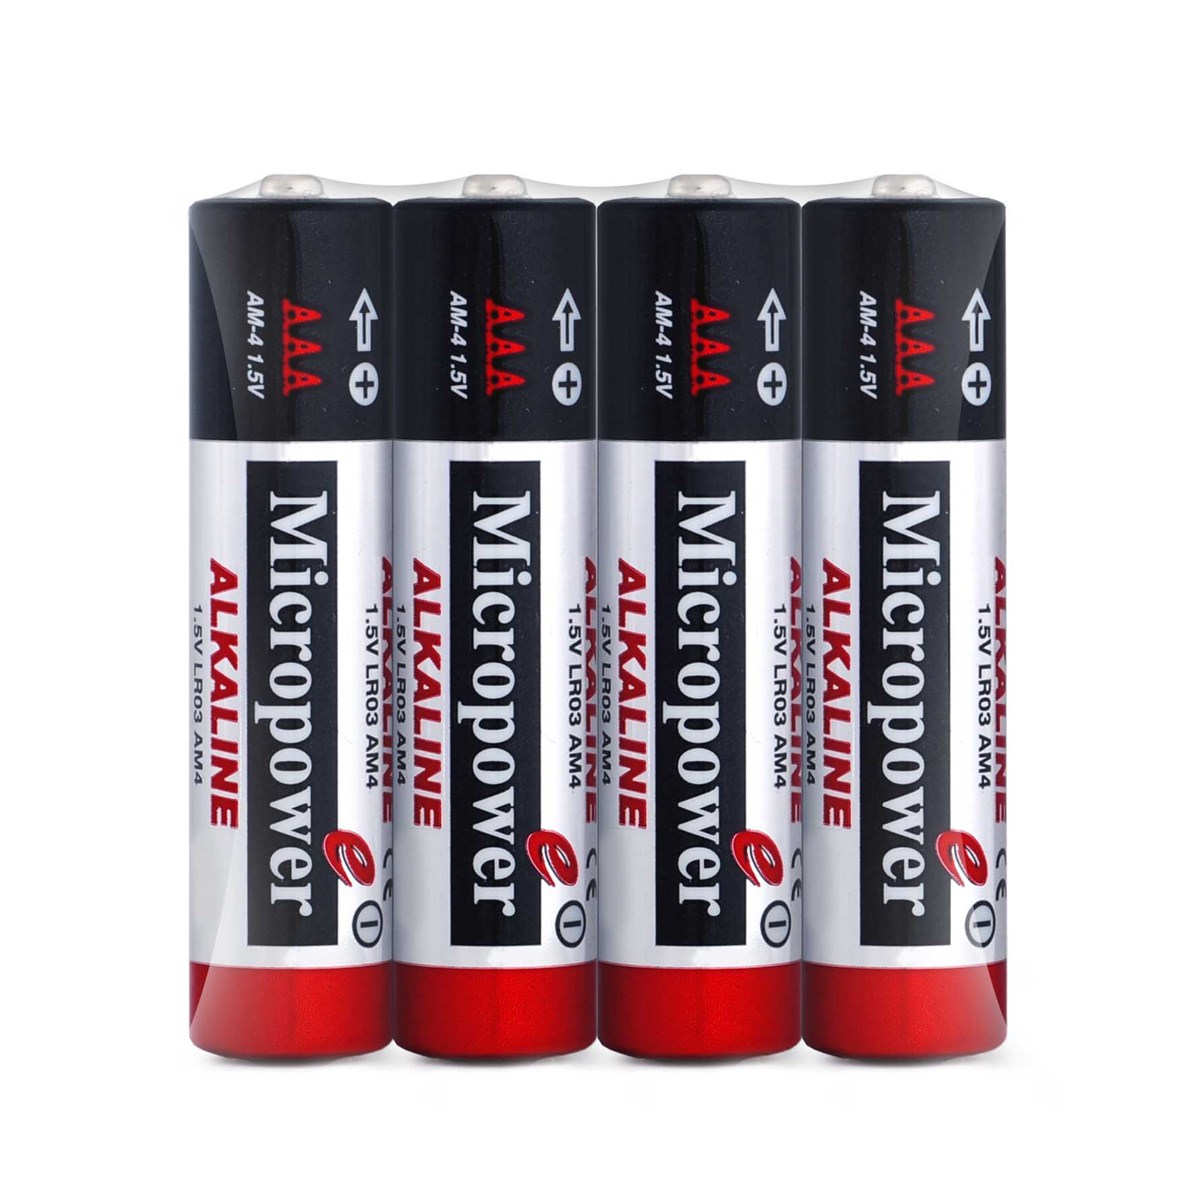 Alkaline Battery AAA LR03 15 V firstclass quality with long durability